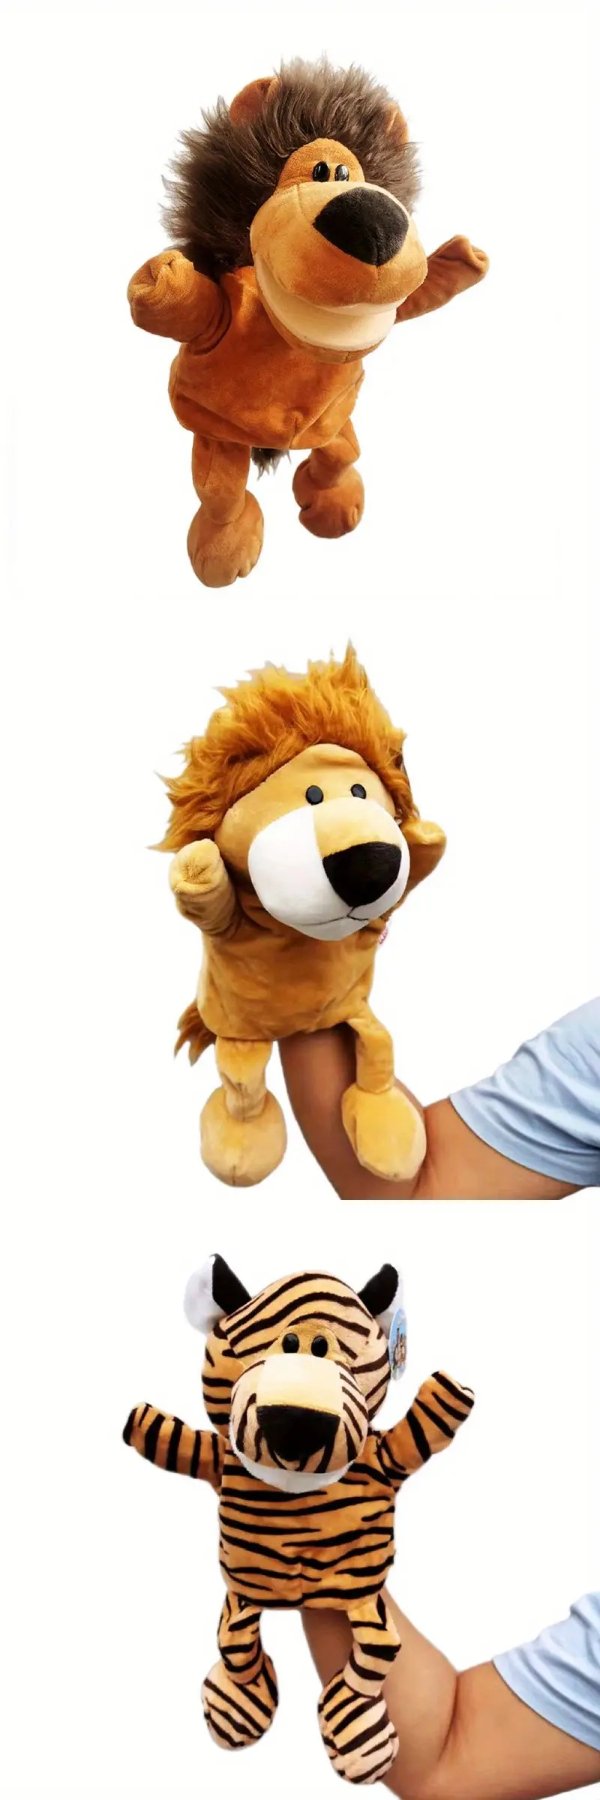 Interactive Storytelling Hand Puppet | Mouth Movable Animal Toy for Creative Play and Education | Ages 3-6